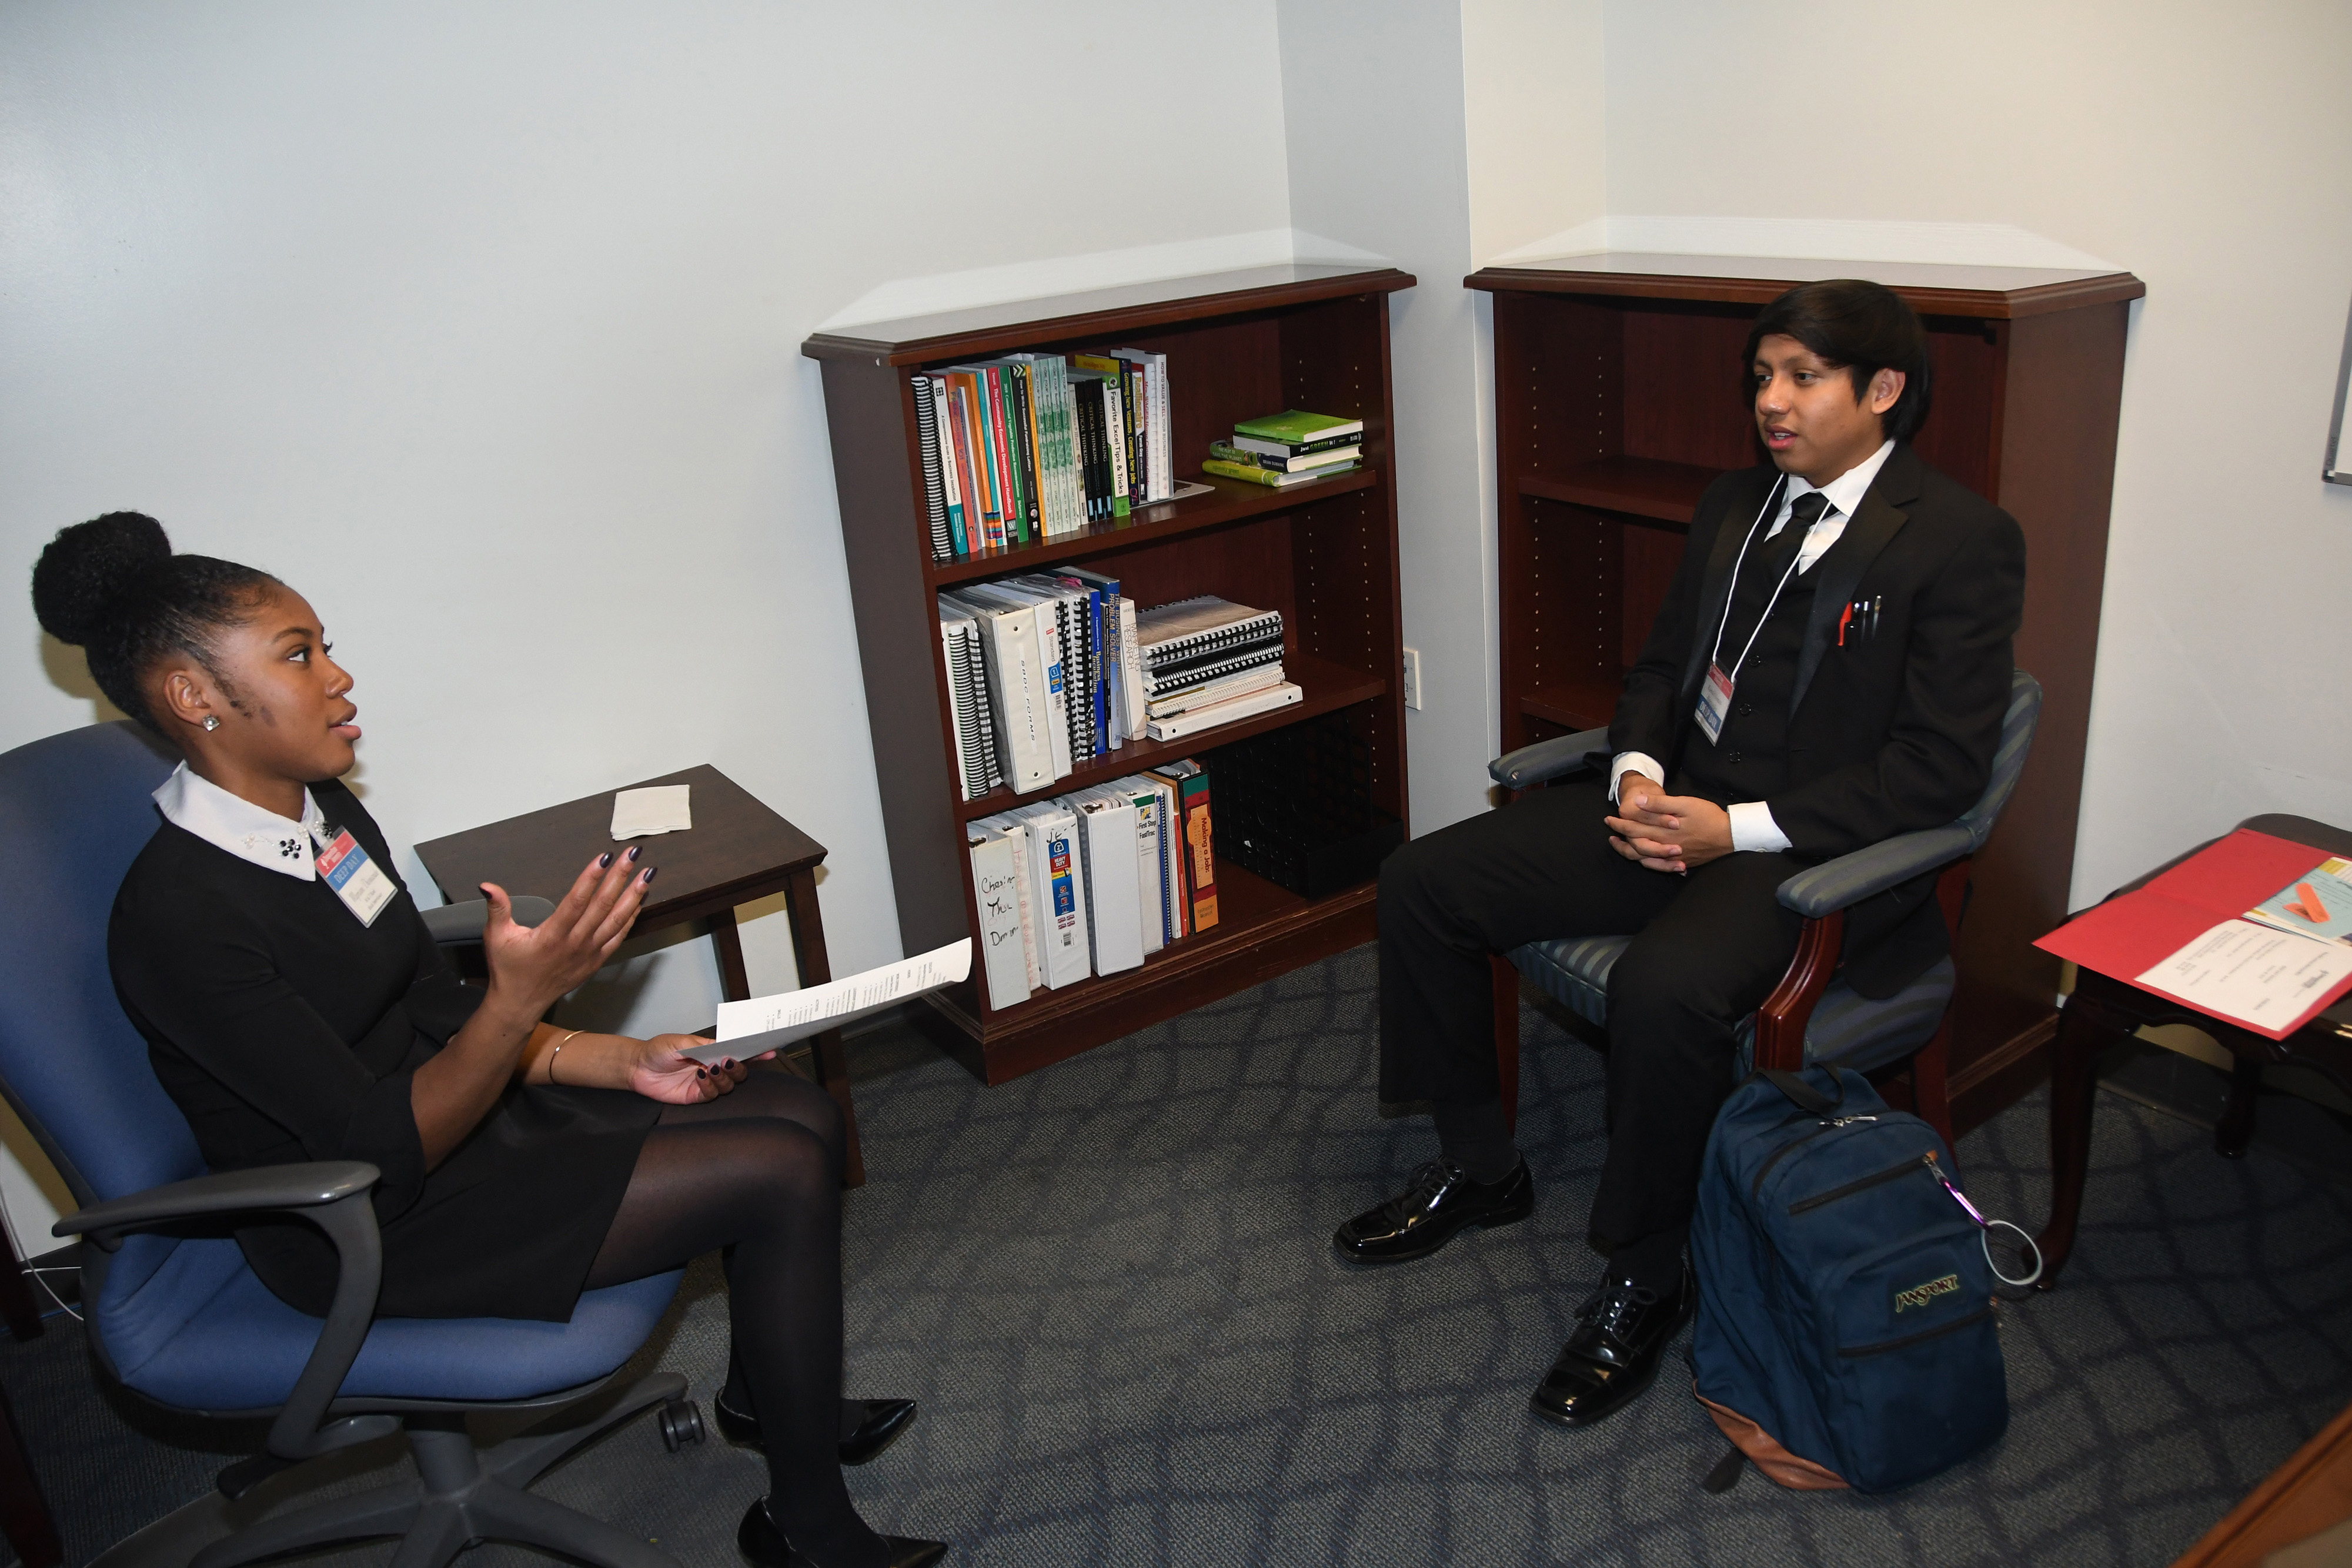 Mock interviews were one of the preparatory elements of the College of Business' annual Deep Day.